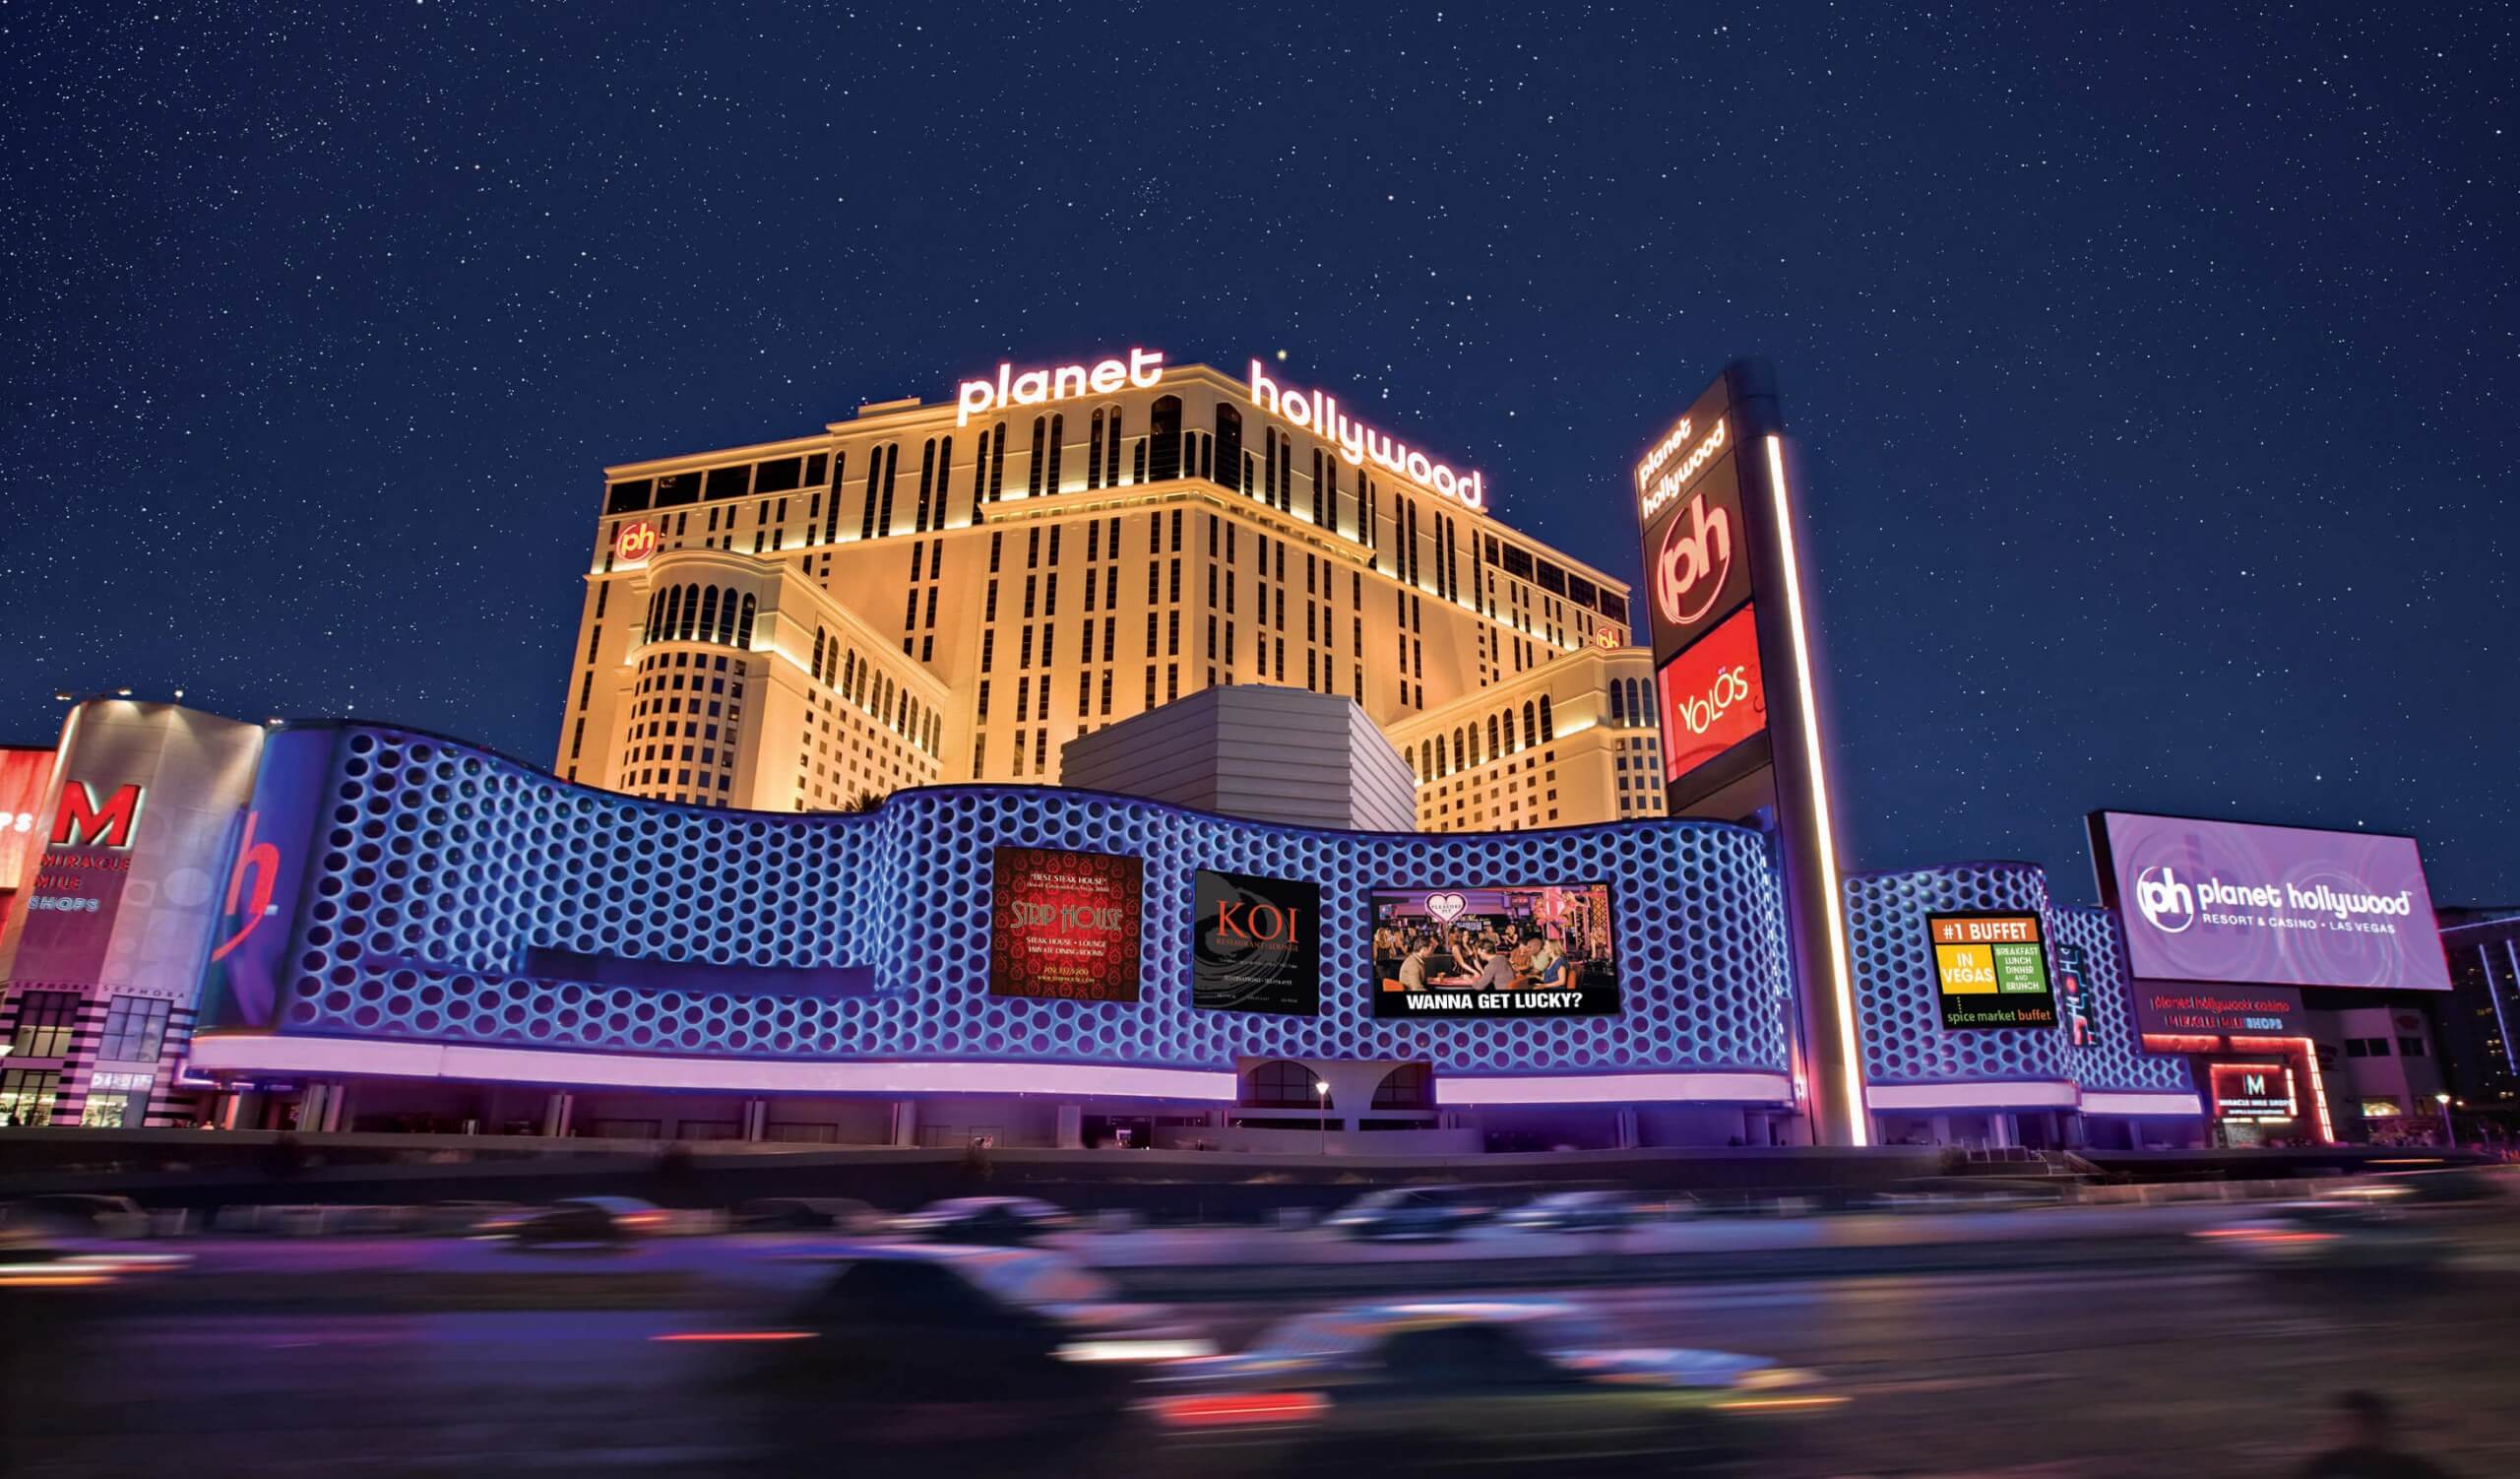 Planet Hollywood's parent company confirms millions of credit and debit card numbers stolen